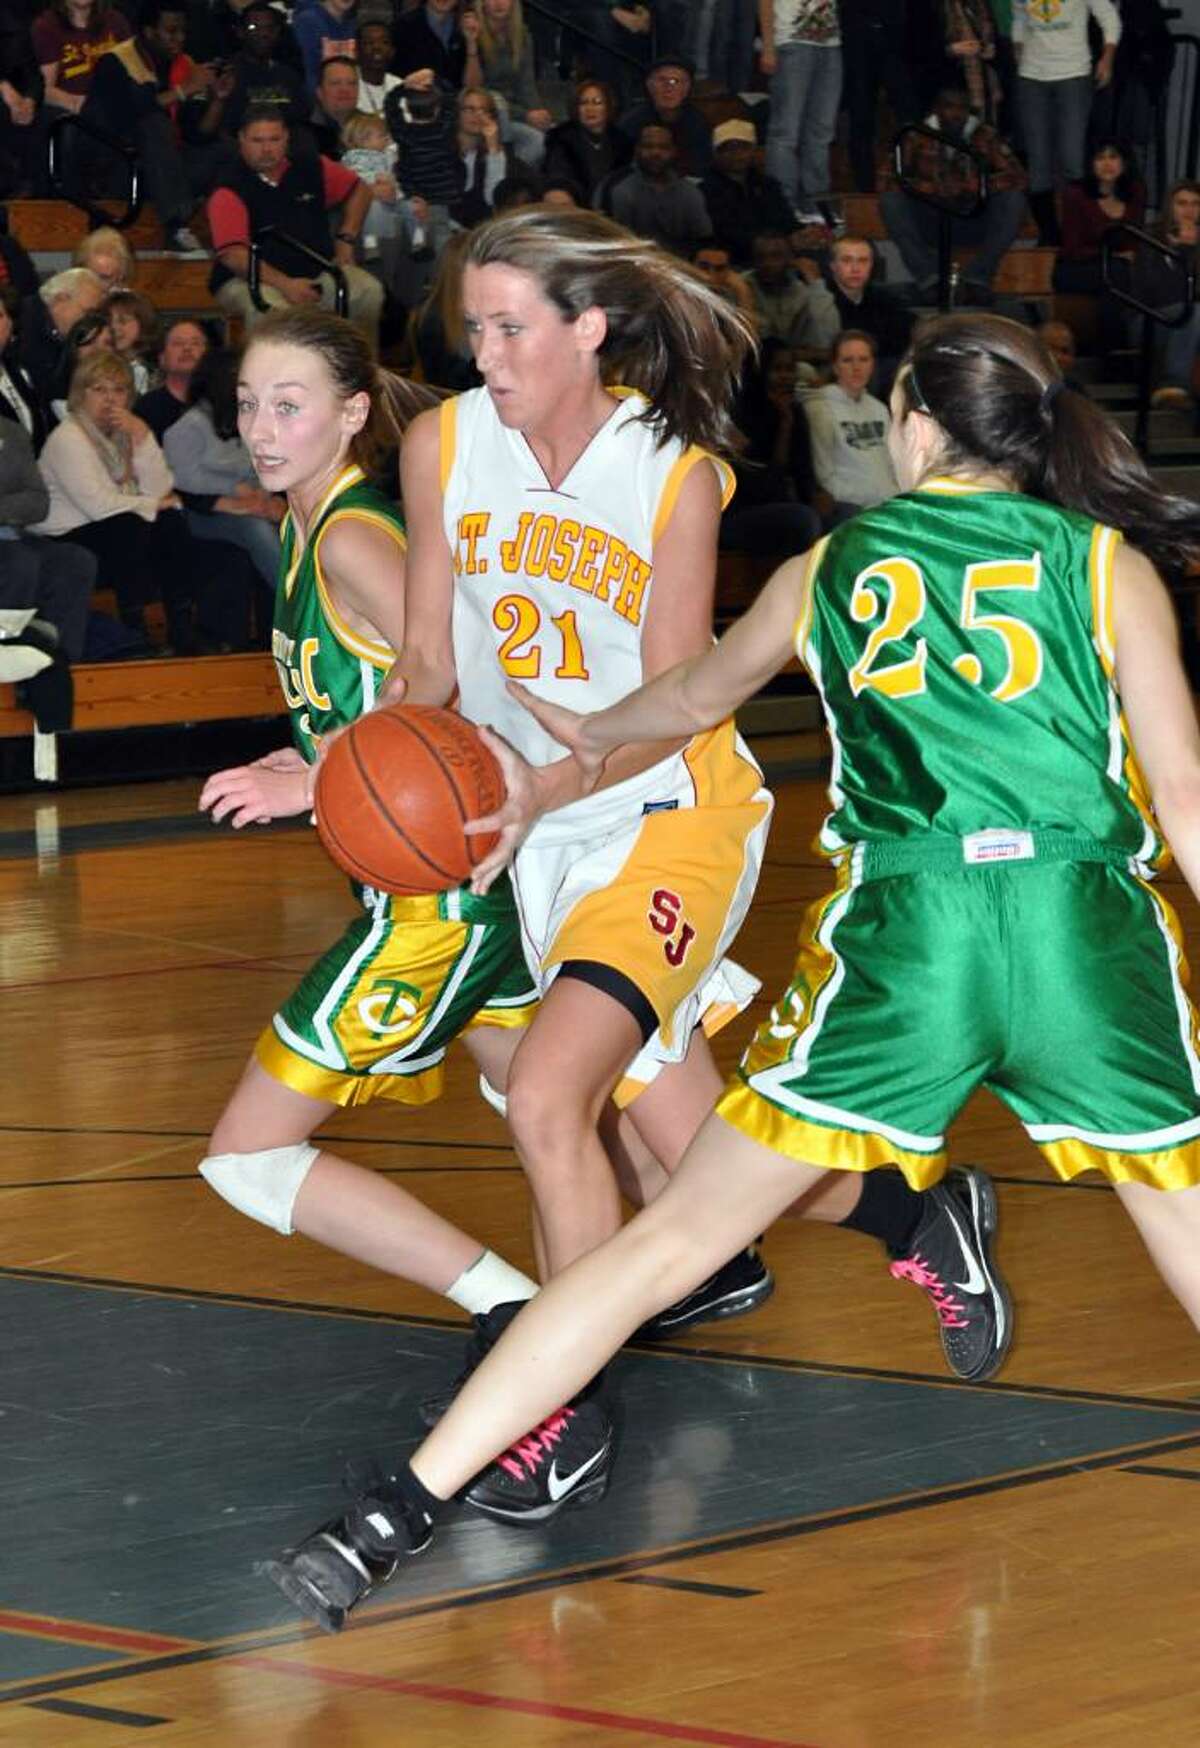 St. Joseph's Michele Gorman breaks through Trinity's defense Machkenzie Griffin and Ali Palma during the first half of the FCIAC girls basketball championship game at Fairfield Ludlowe High School on Saturday, Feb. 27, 2010.